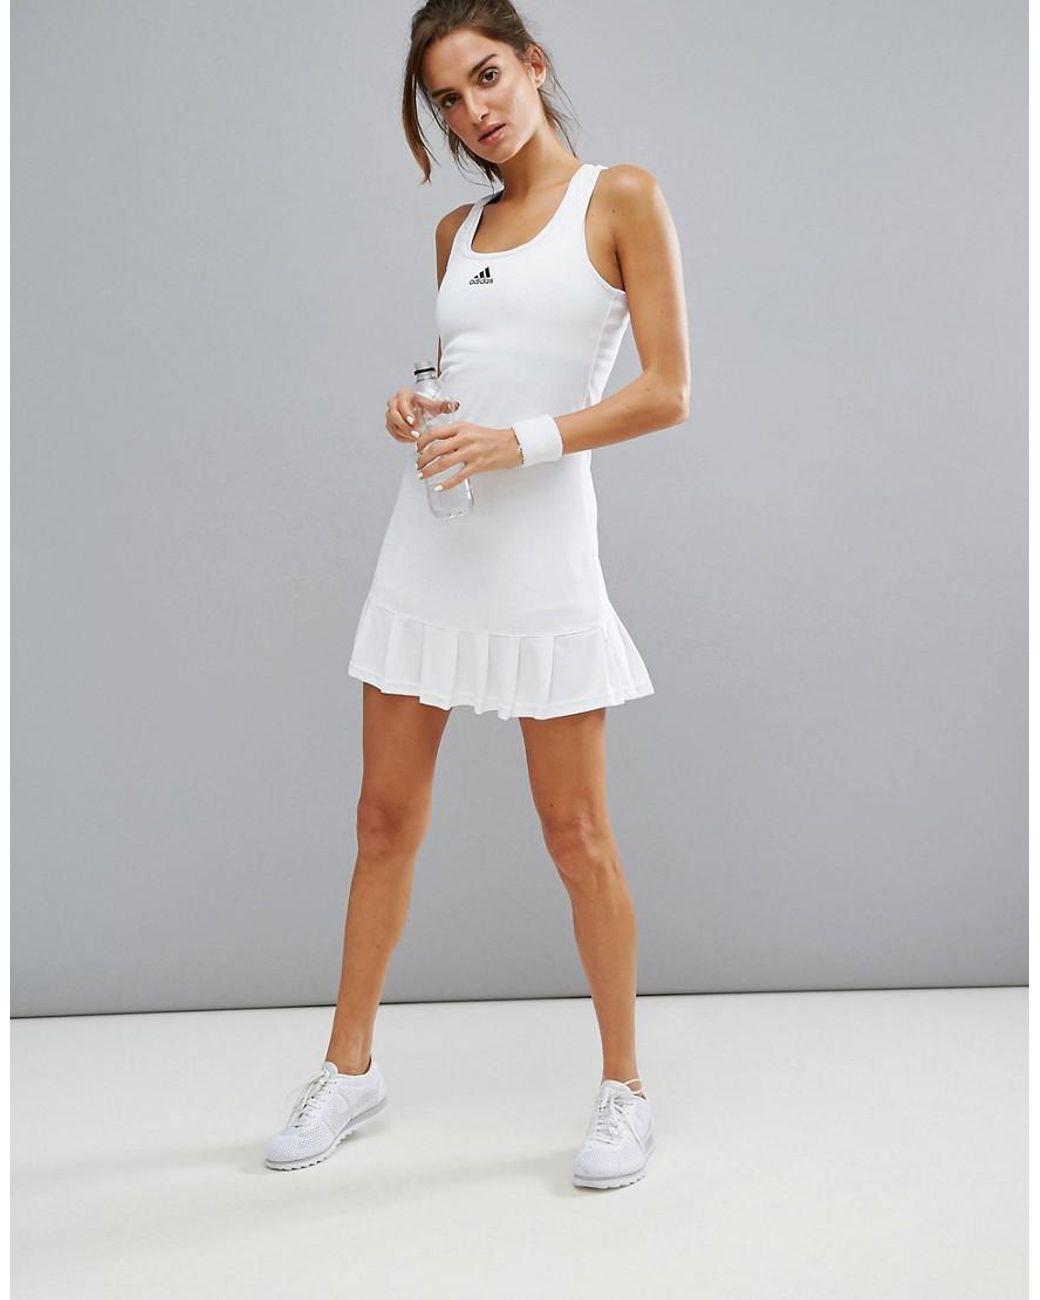 adidas Originals Tennis Dress With Shorts in White | Lyst